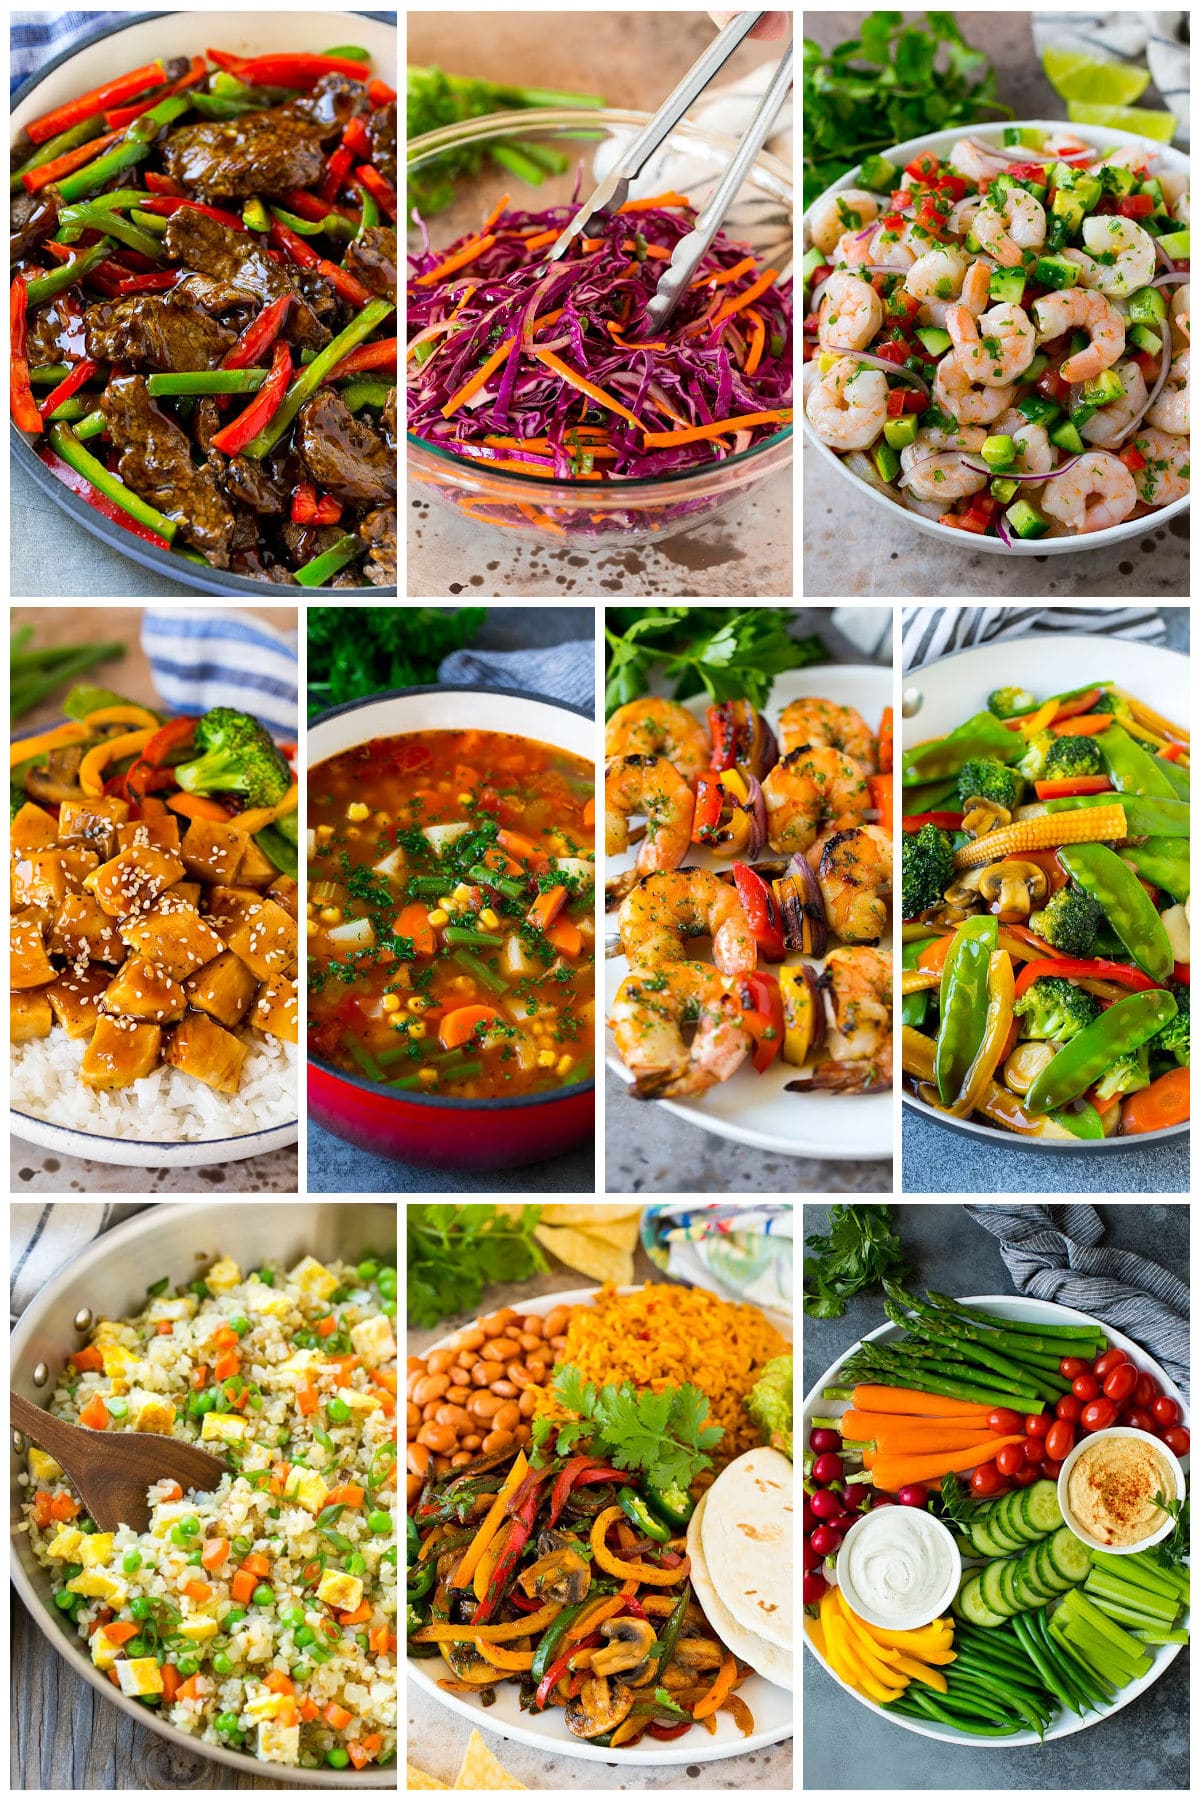 A collection of healthy recipes like vegetarian fajitas, red cabbage slaw and vegetable stir fry.